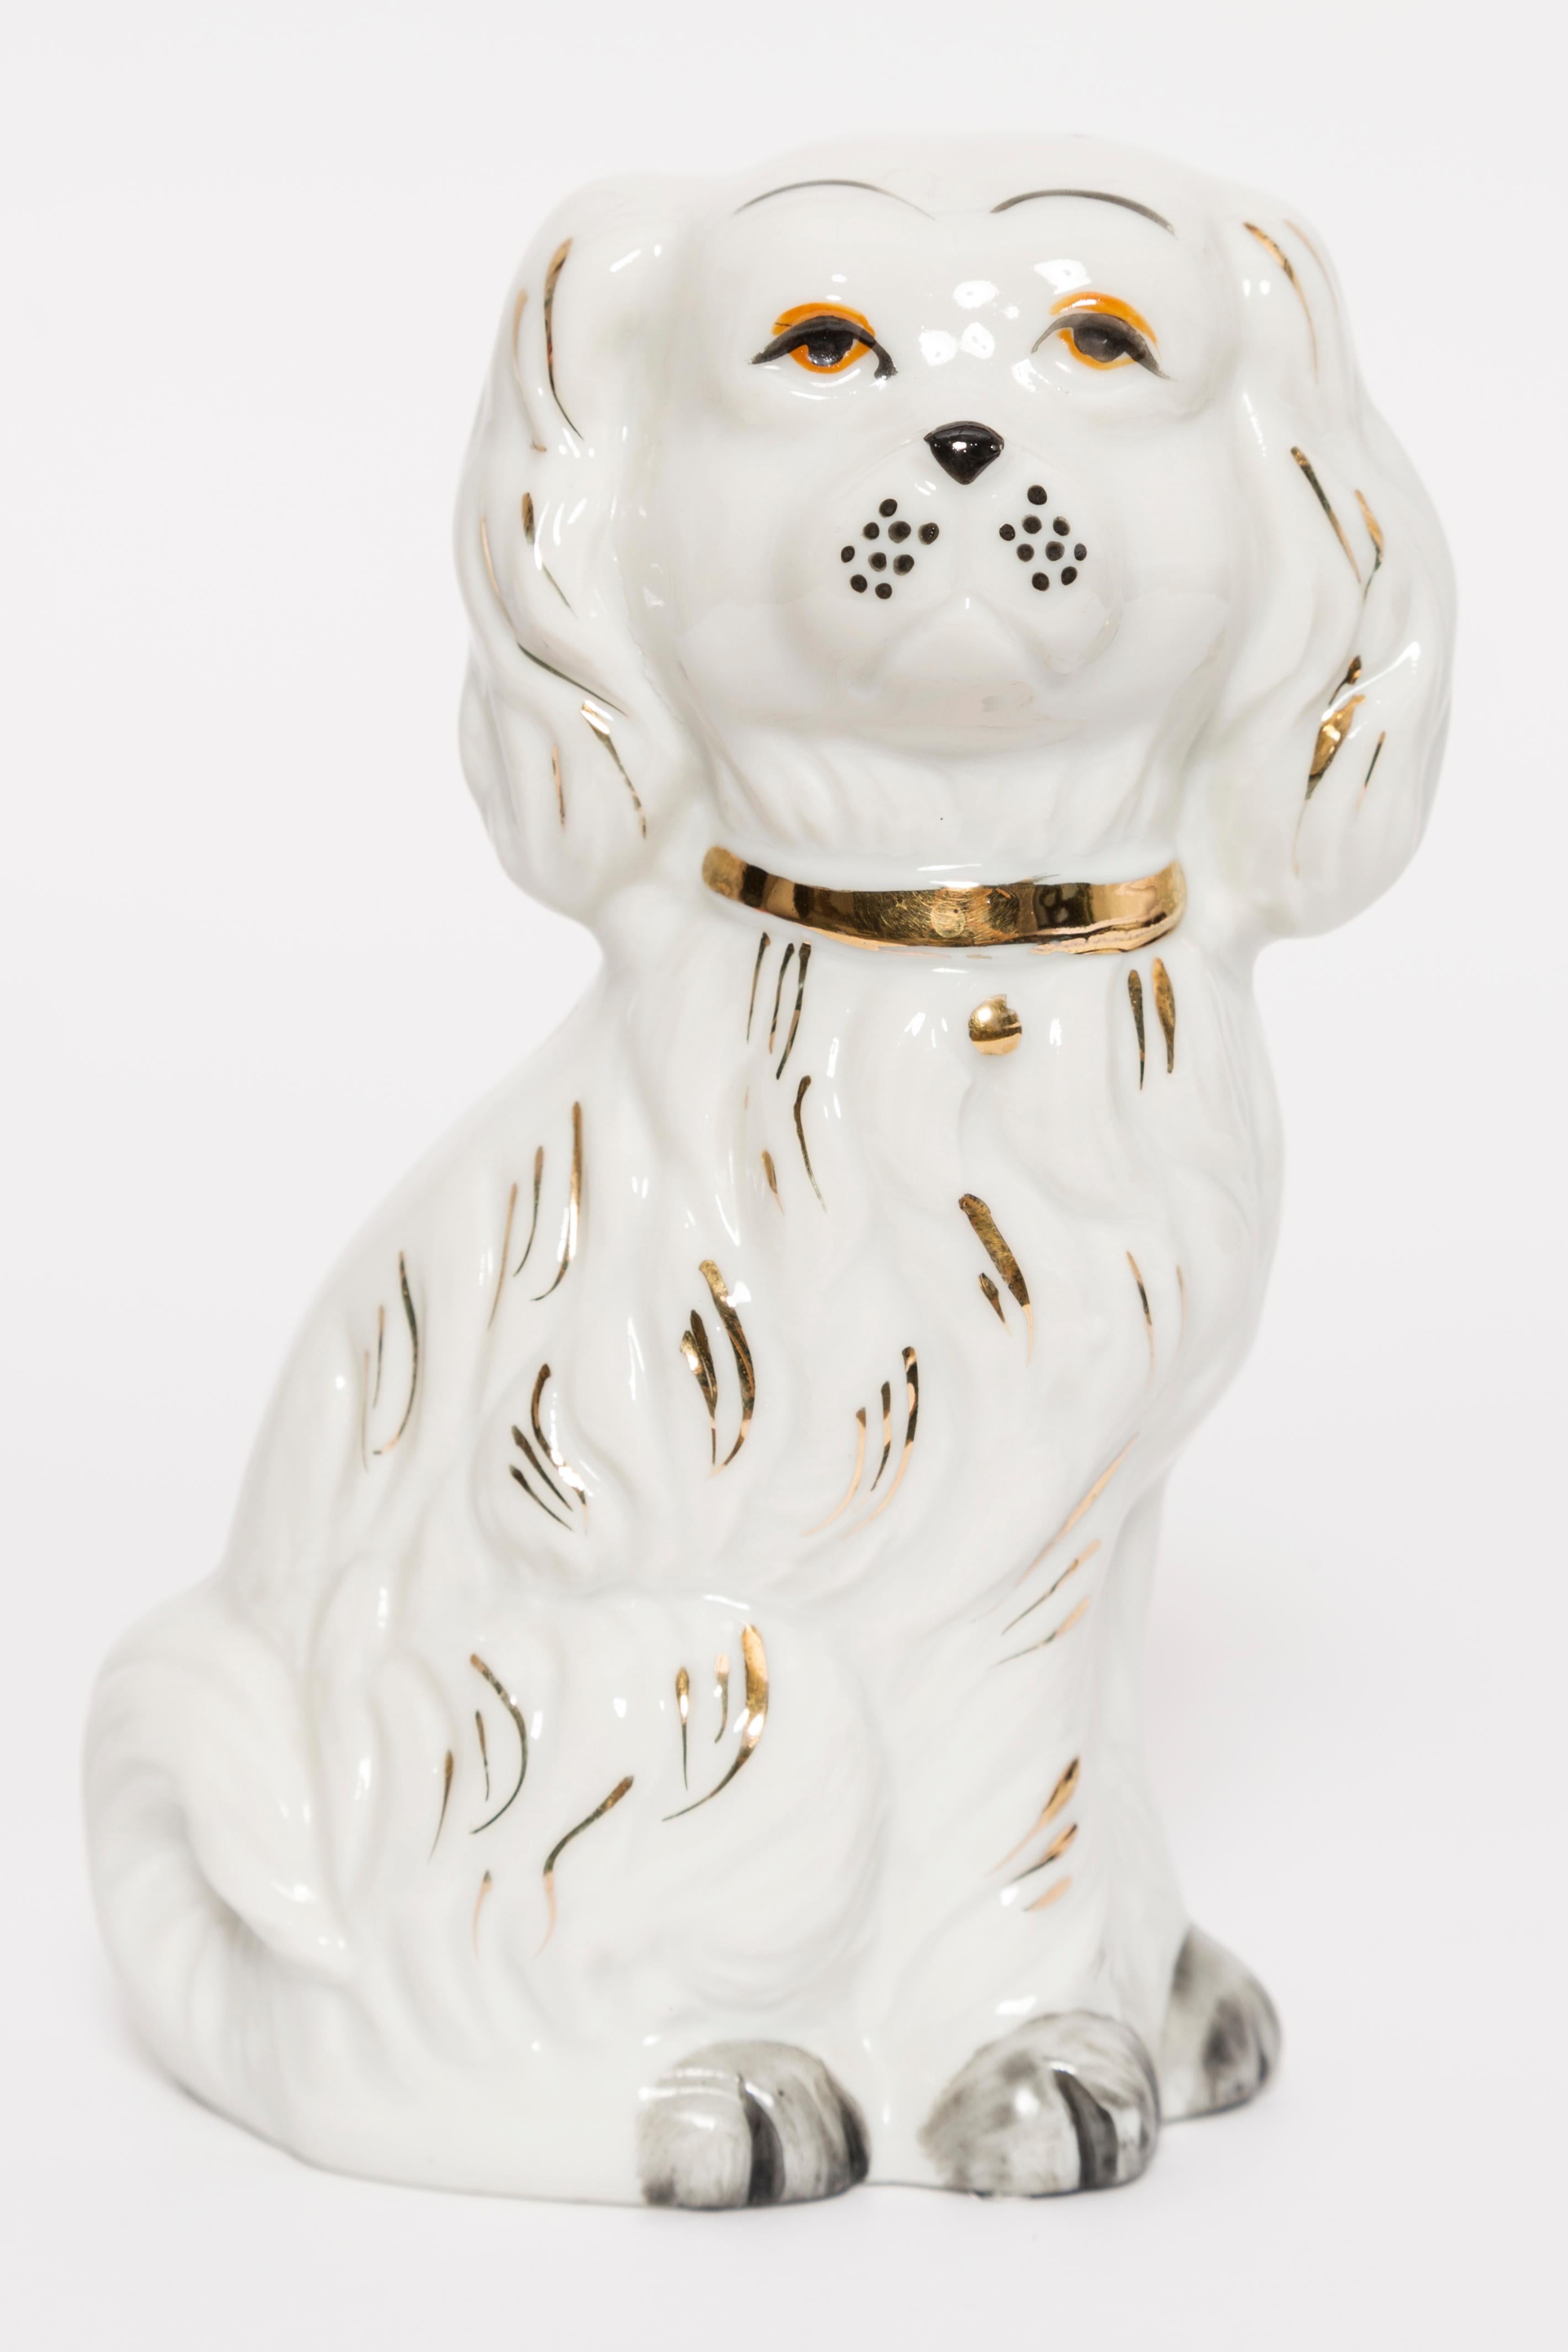 Painted ceramic, very good original vintage condition. No damages or cracks. Beautiful and unique decorative sculpture. Small Dog Sculpture was produced in Italy. Only one dog available.